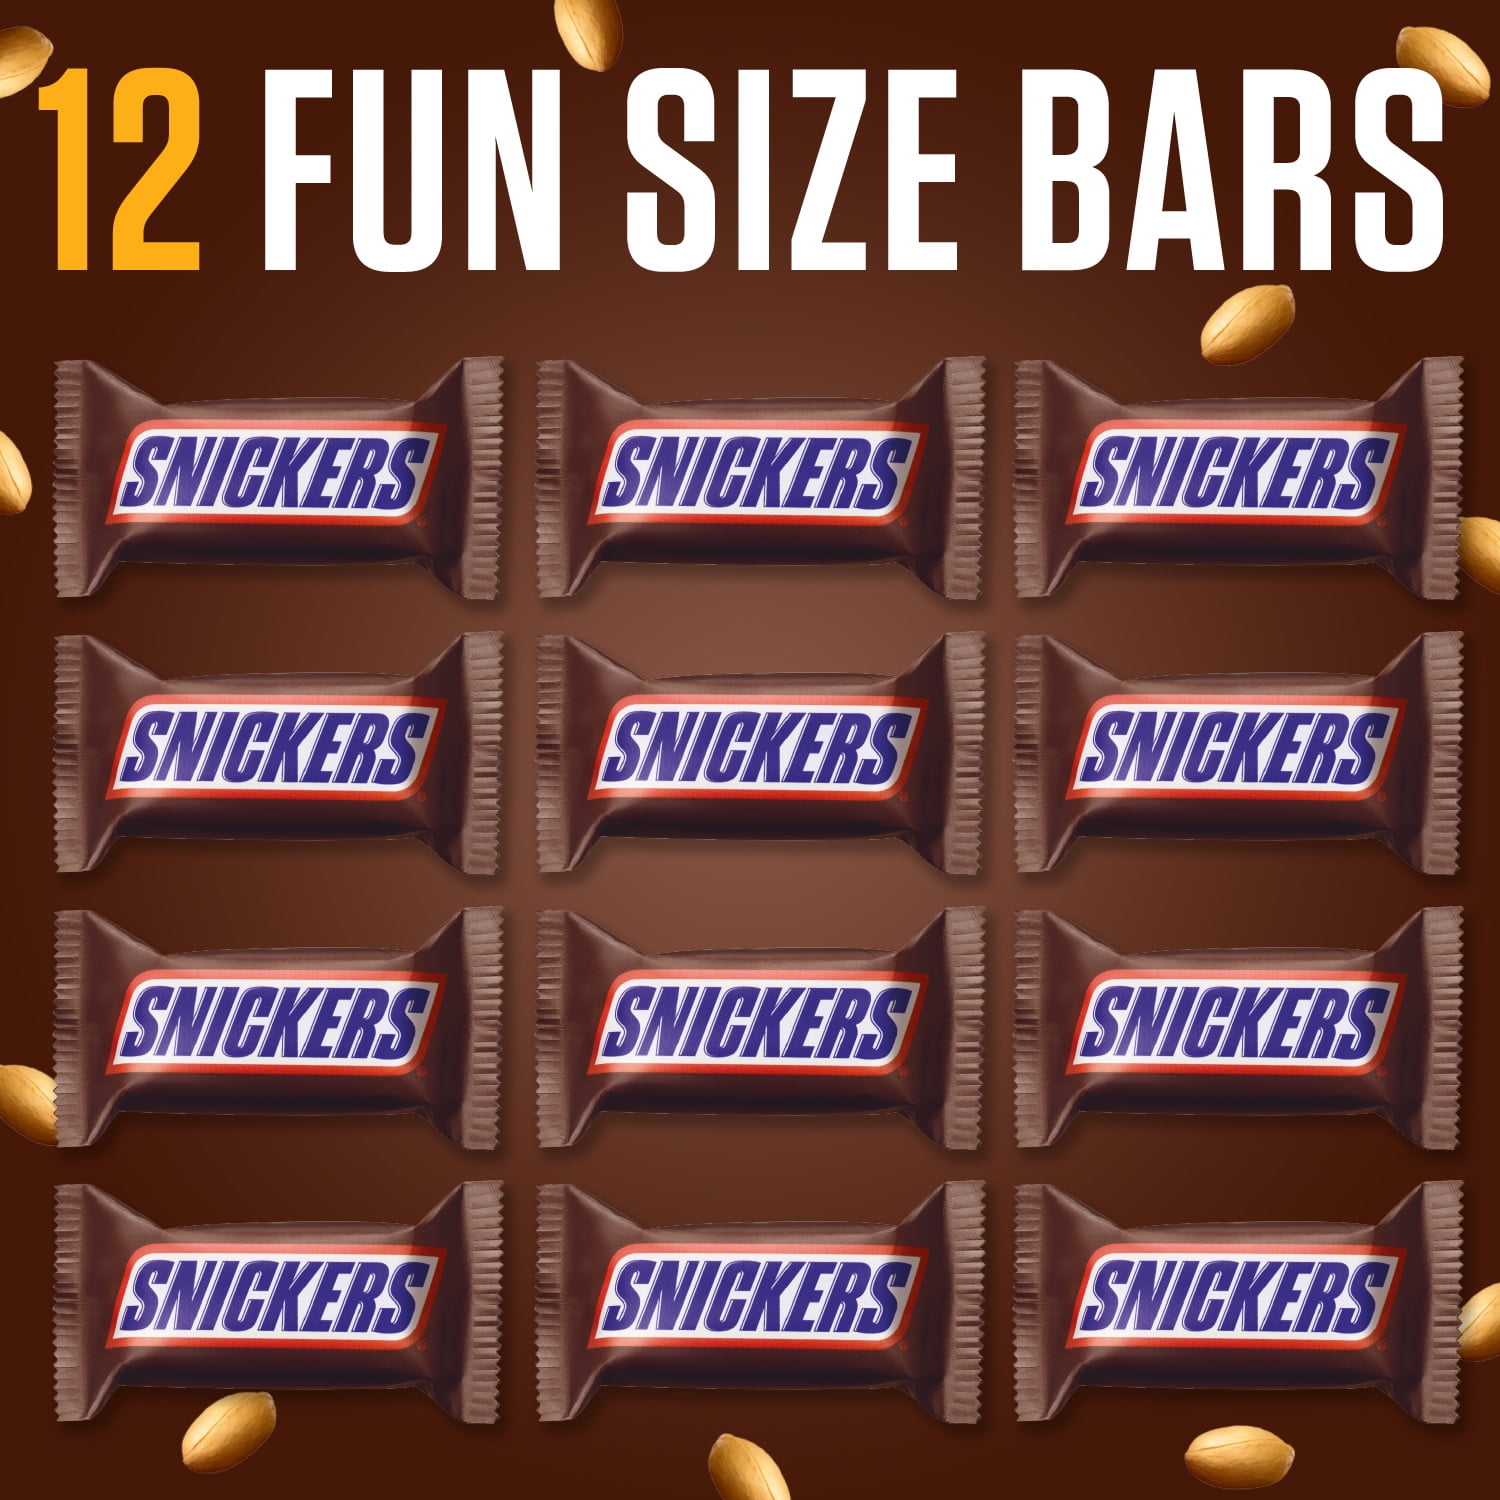 Snickers Fun Size Chocolate Candy Bars Value Pack, 70 pk.